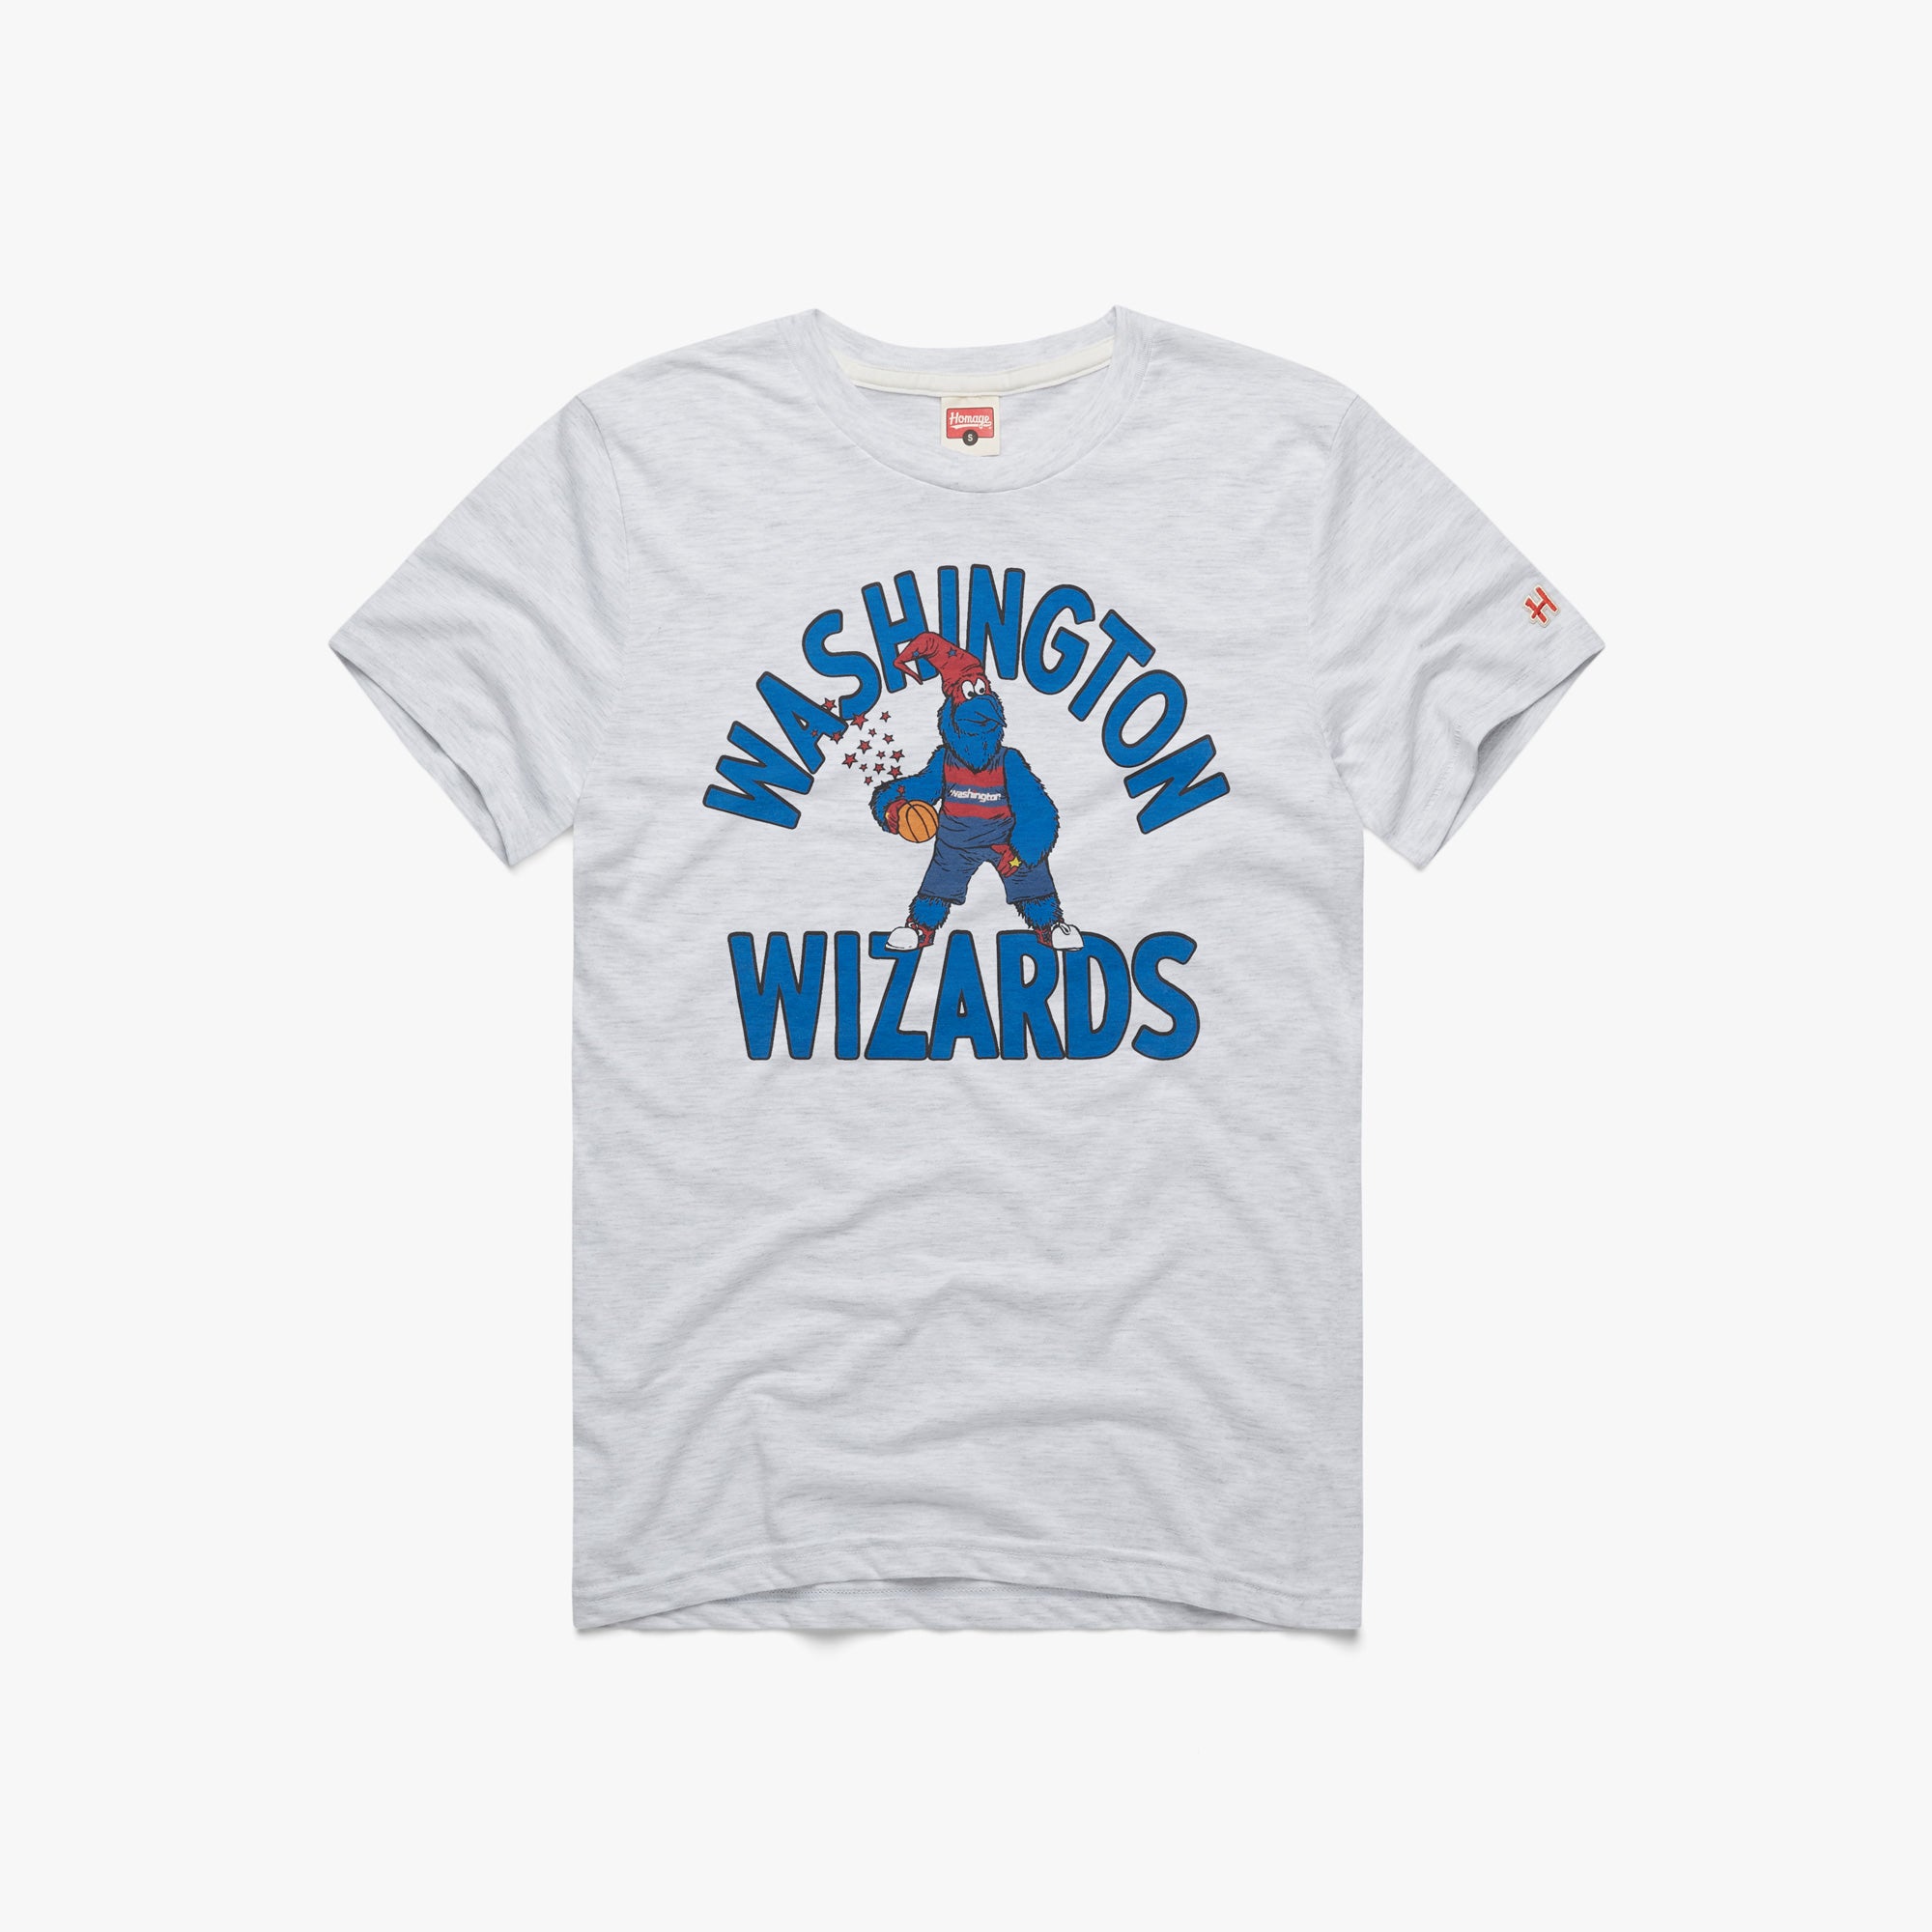 Washington Wizards G-Wiz T-Shirt from Homage. | Ash | Vintage Apparel from Homage.